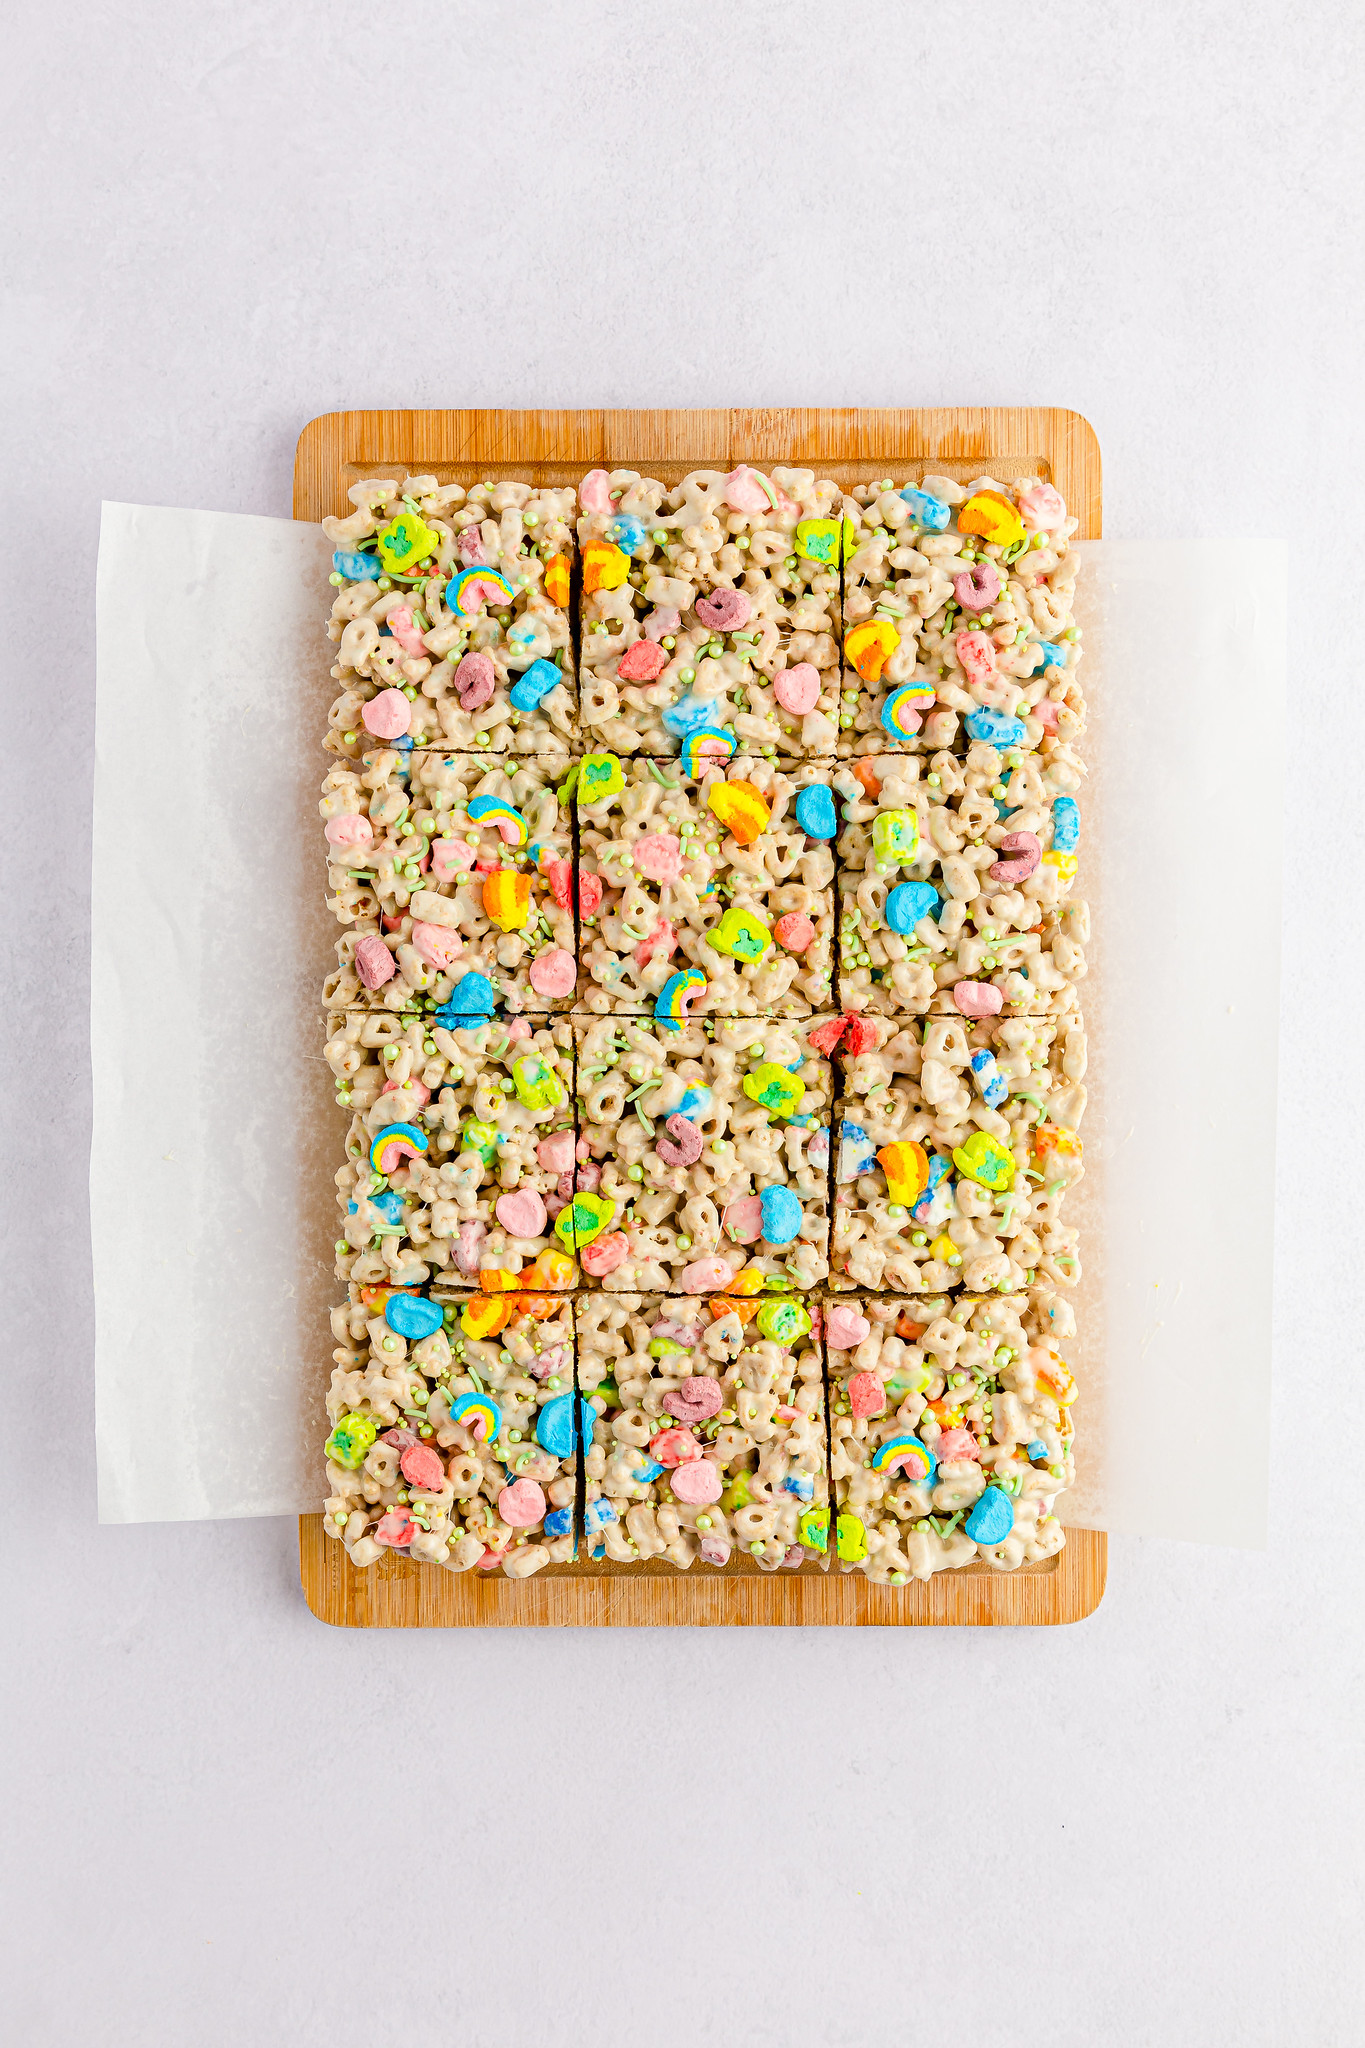 12 lucky charms treats on a wooden cutting board and parchment paper